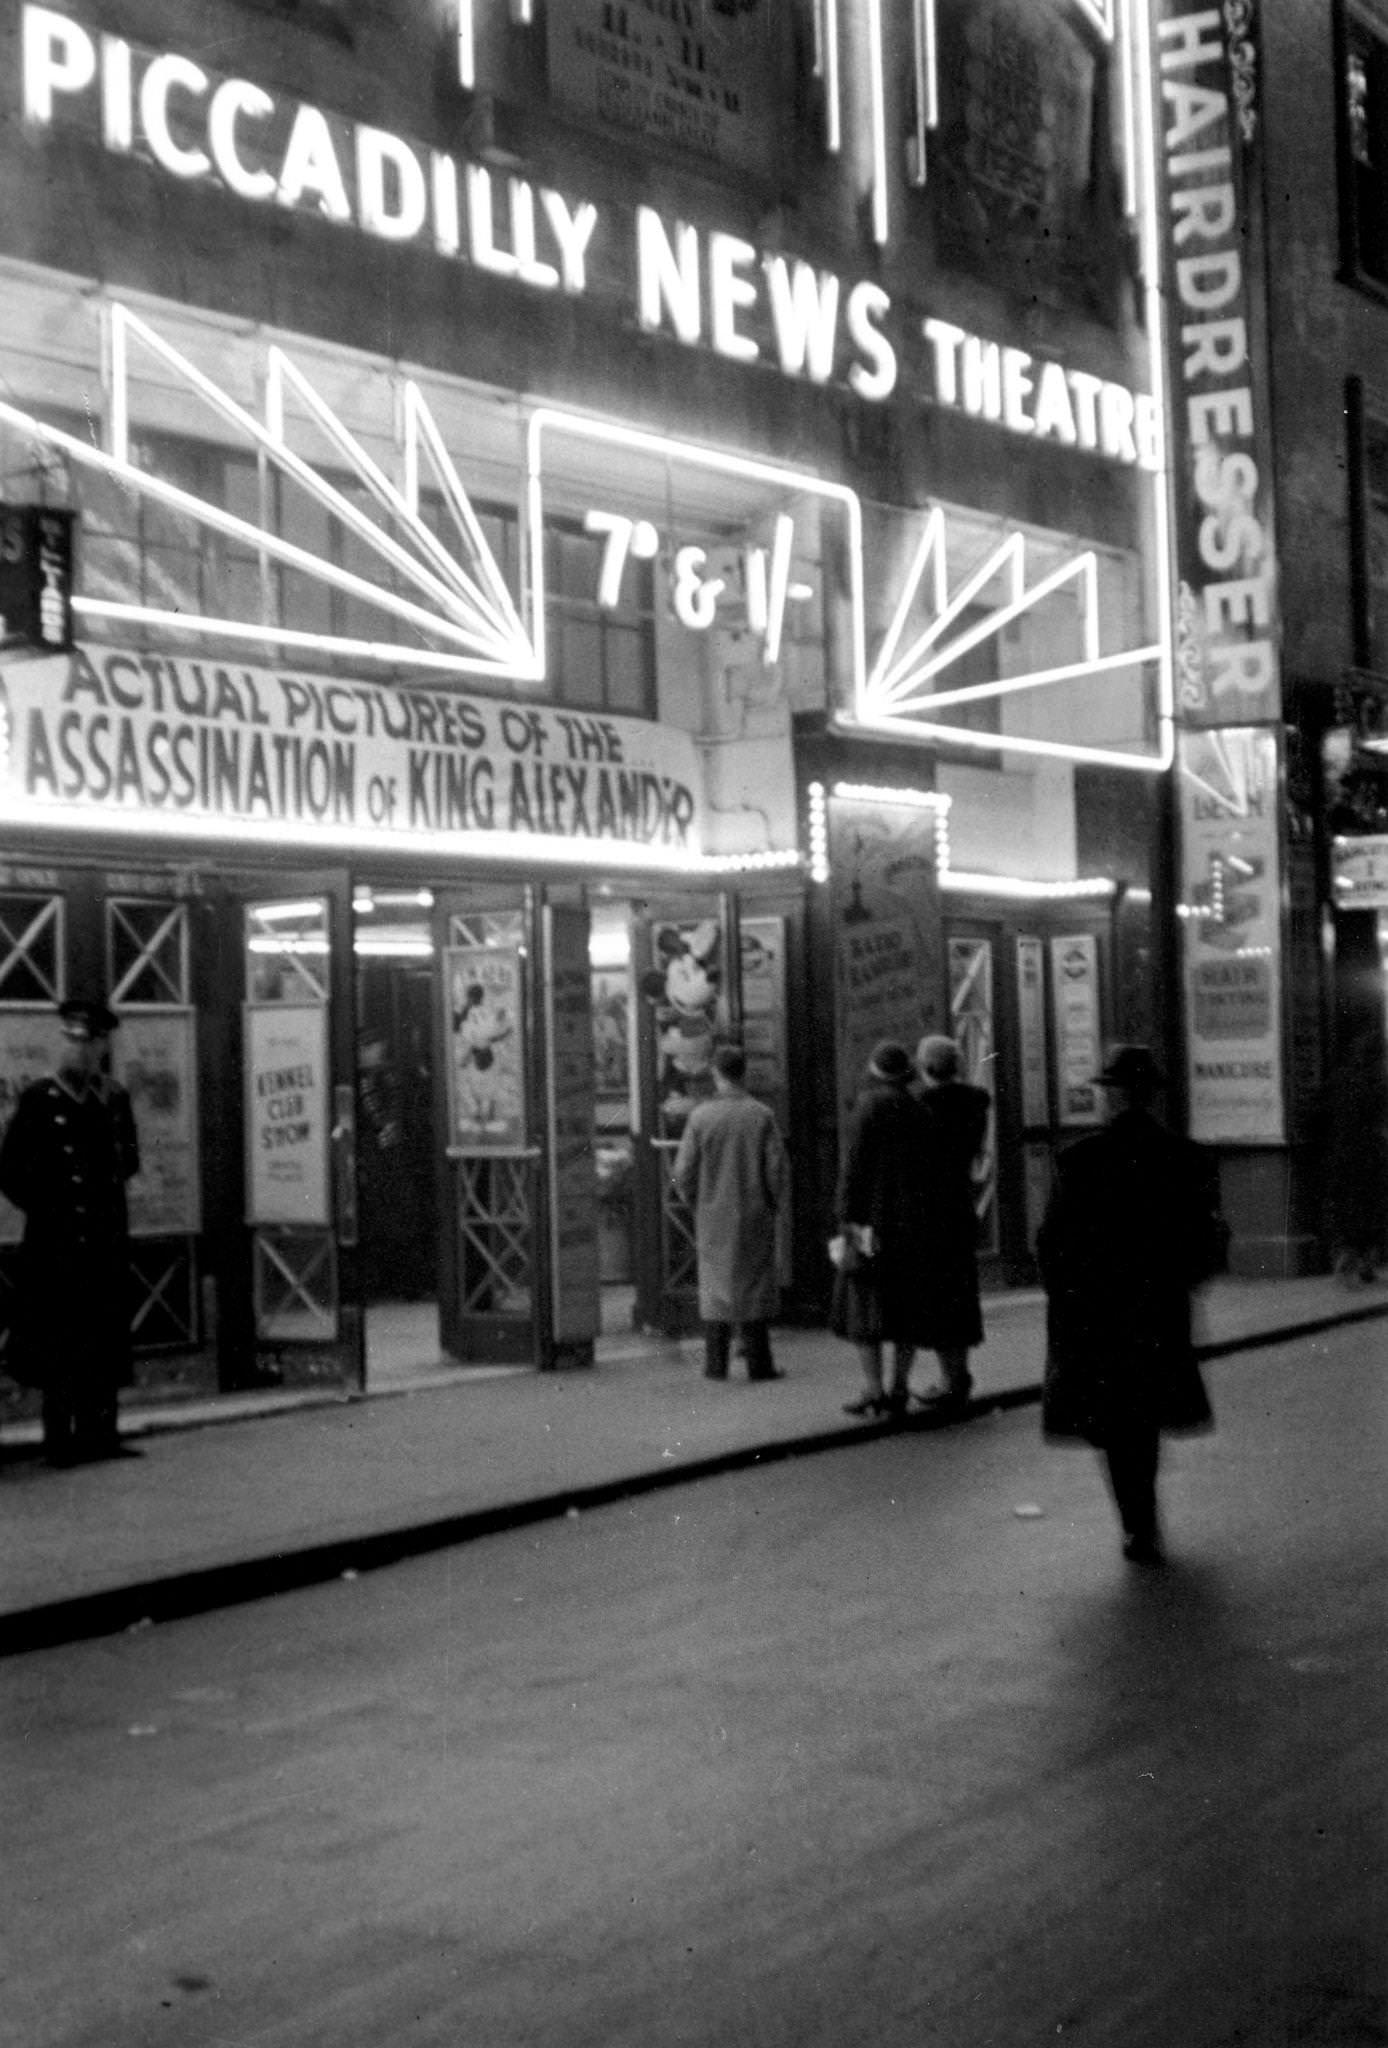 The Piccadilly News Theatre by night, 1934.